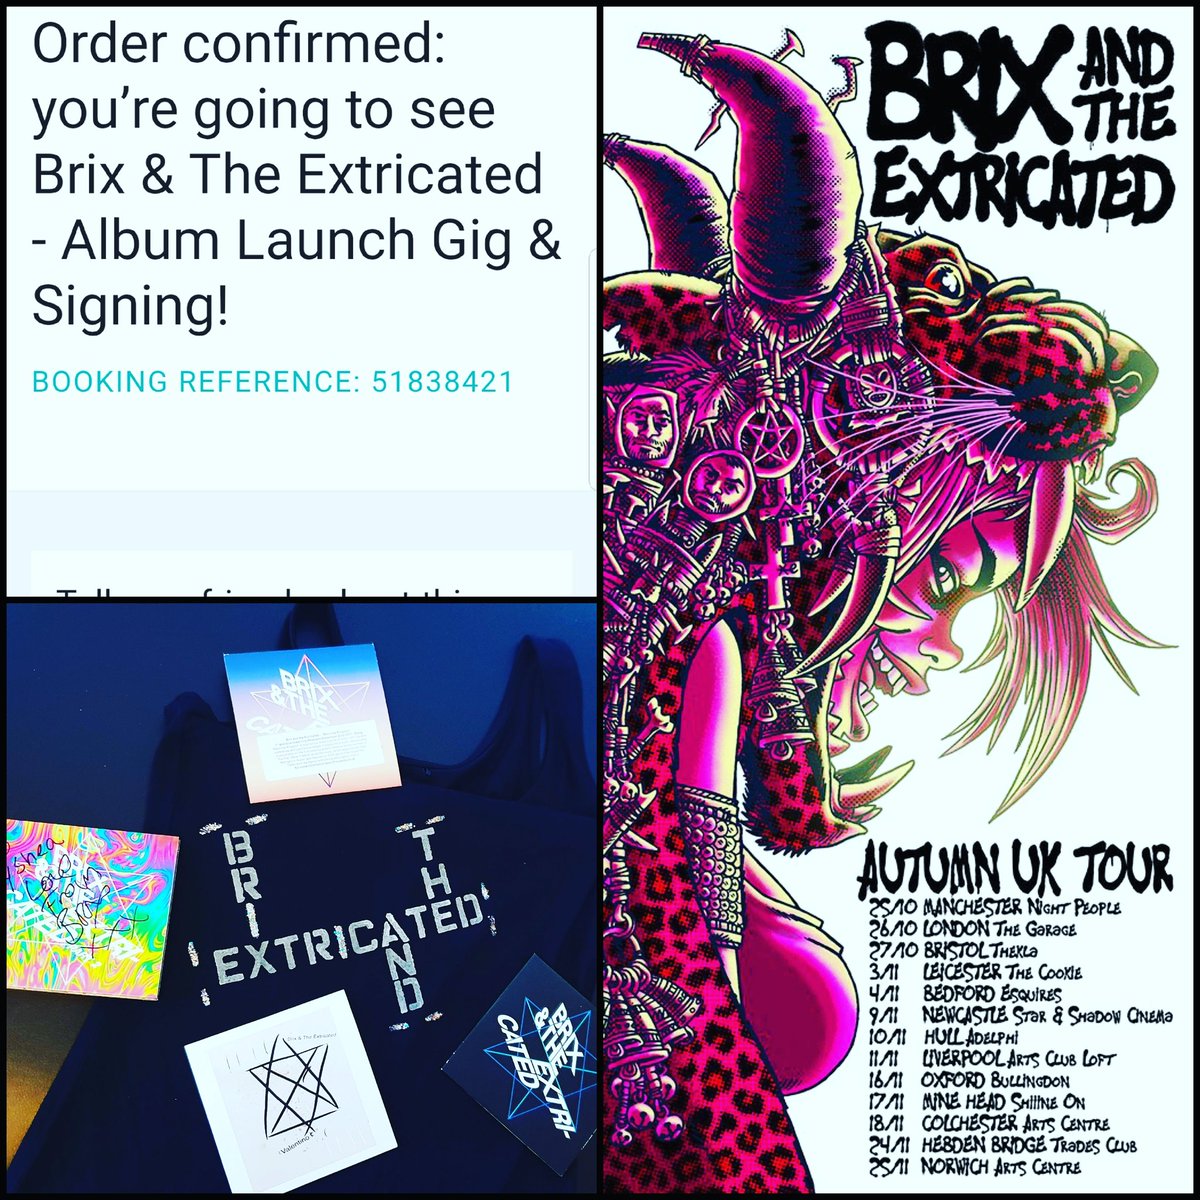 Booked and ridin' solo for this one @BrixExtricated @Brixsmithstart @nightpeoplemcr Who's with me?! #saturyay #brixandtheextricated #brixsmithstart #newalbum #launchnight #extricated 🖤💥💖💫👩‍🎤⚡🖤🙌